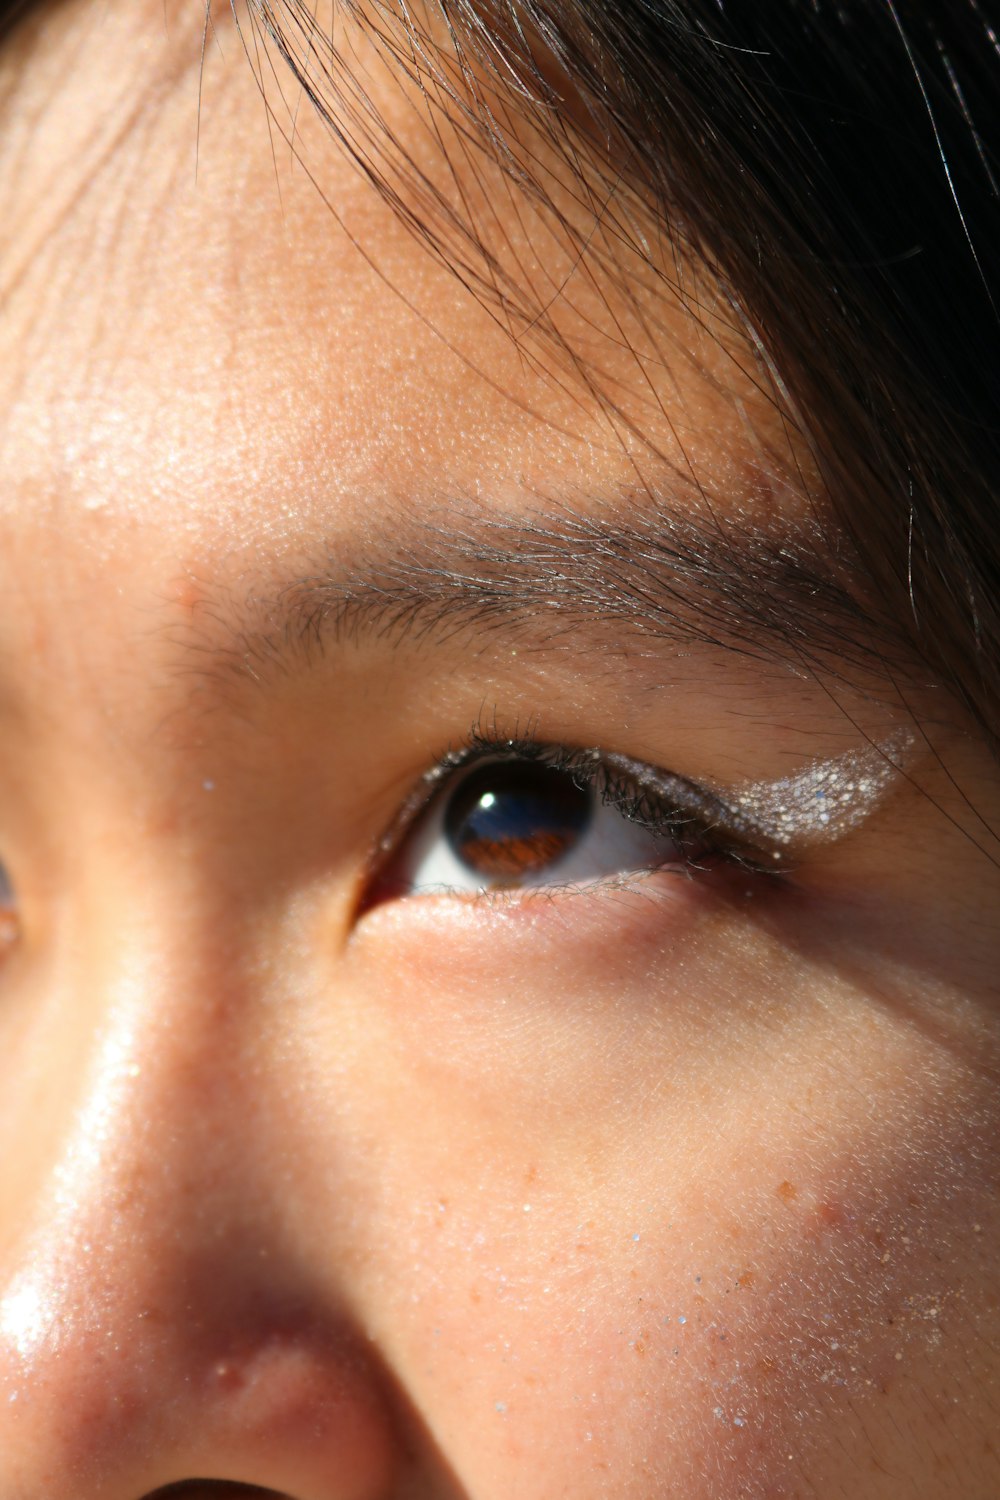 a close up of a person's face with a white eyeliner